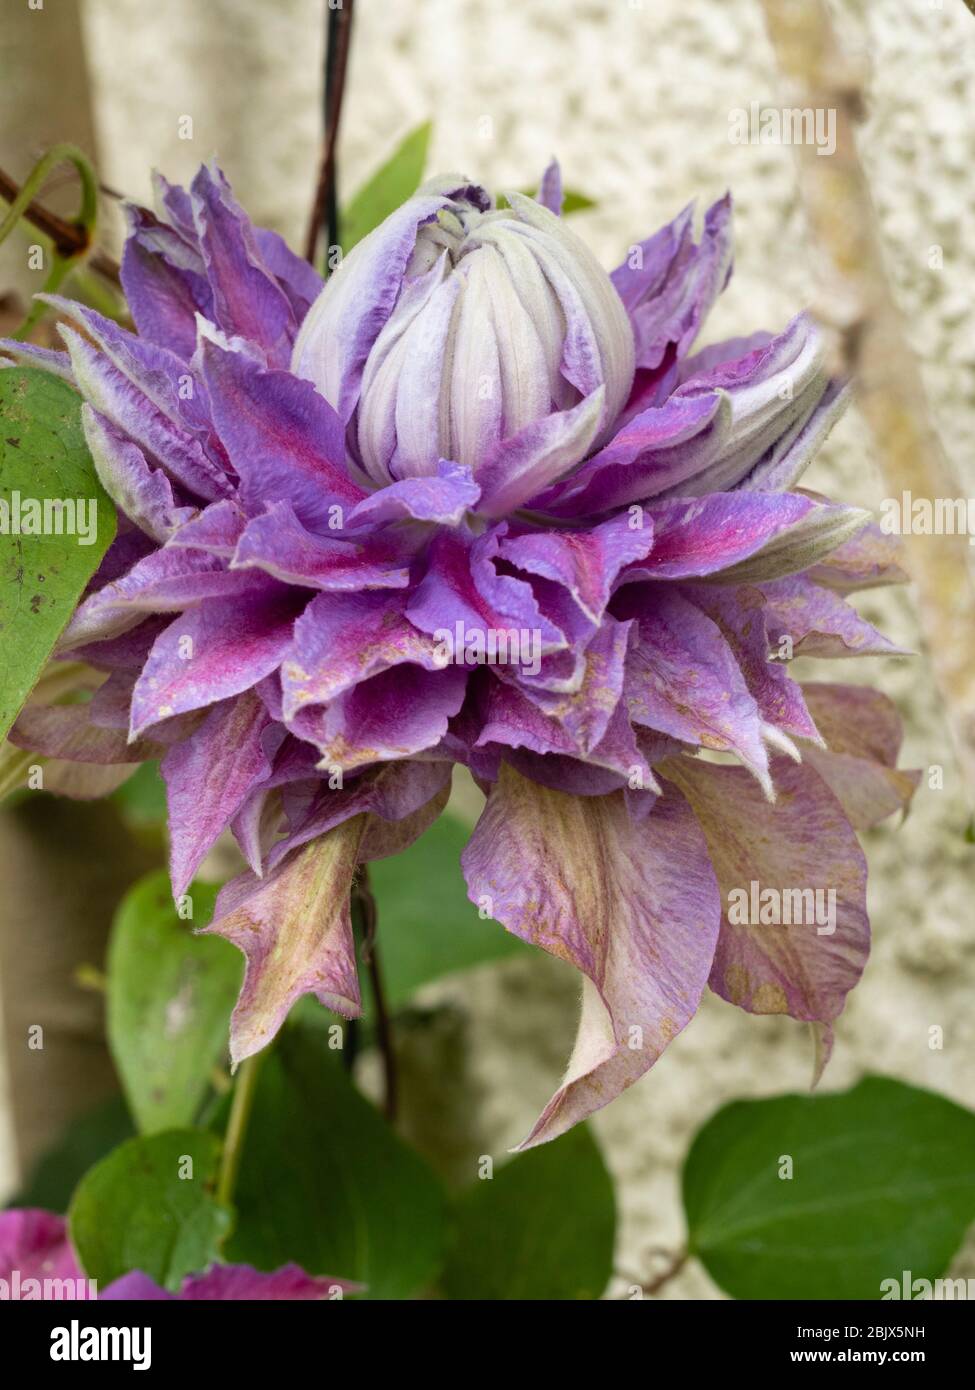 Double flower of the hardy climber, Clematis 'Diamantina' Stock Photo